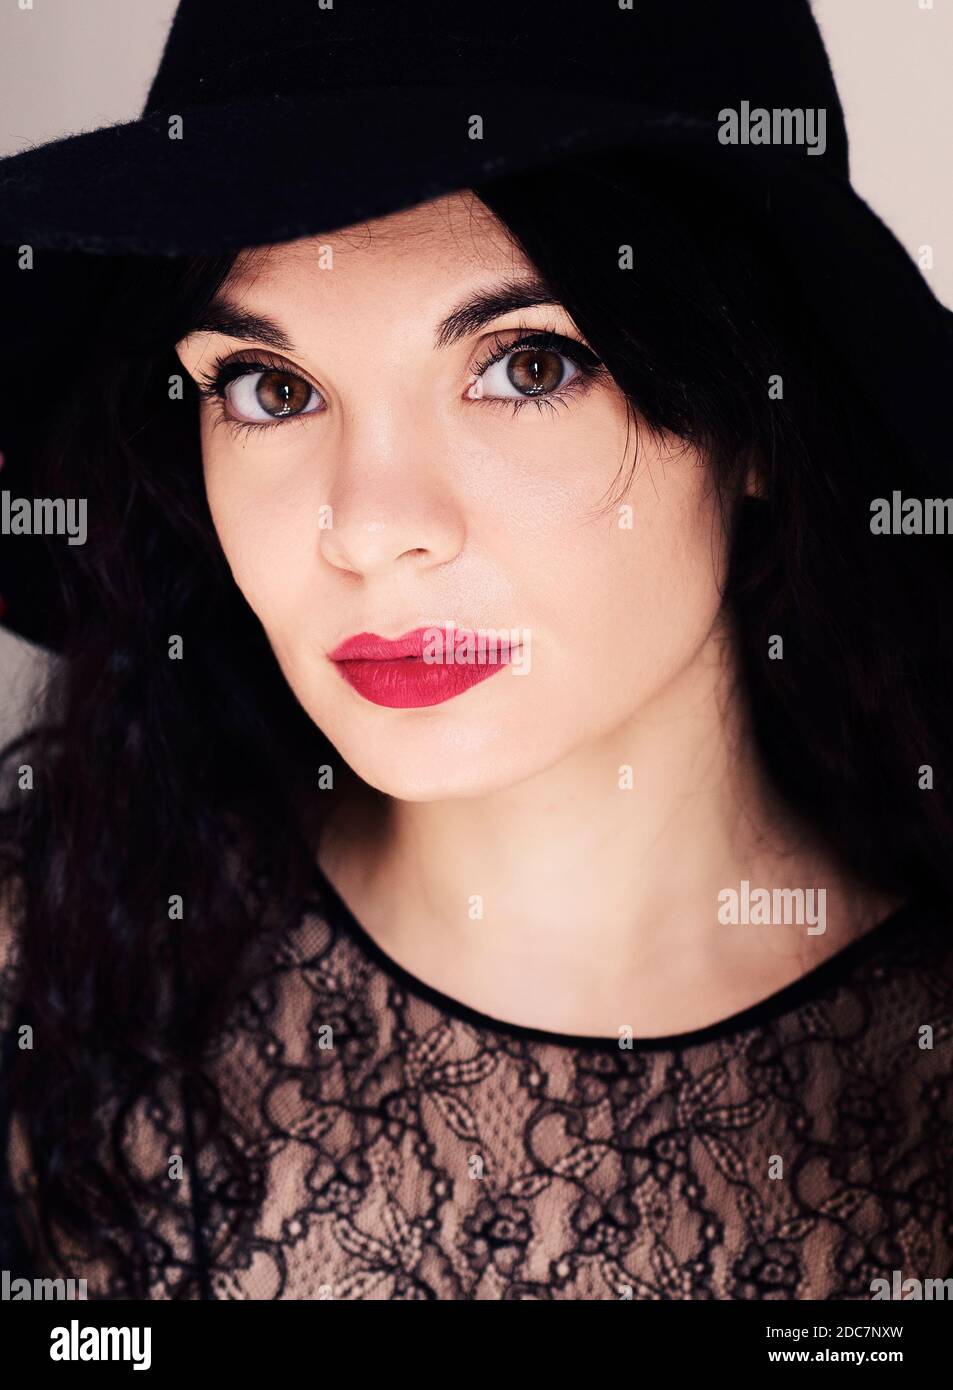 Beautiful young woma with big eyes wearing a black hat and red lipstick Stock Photo